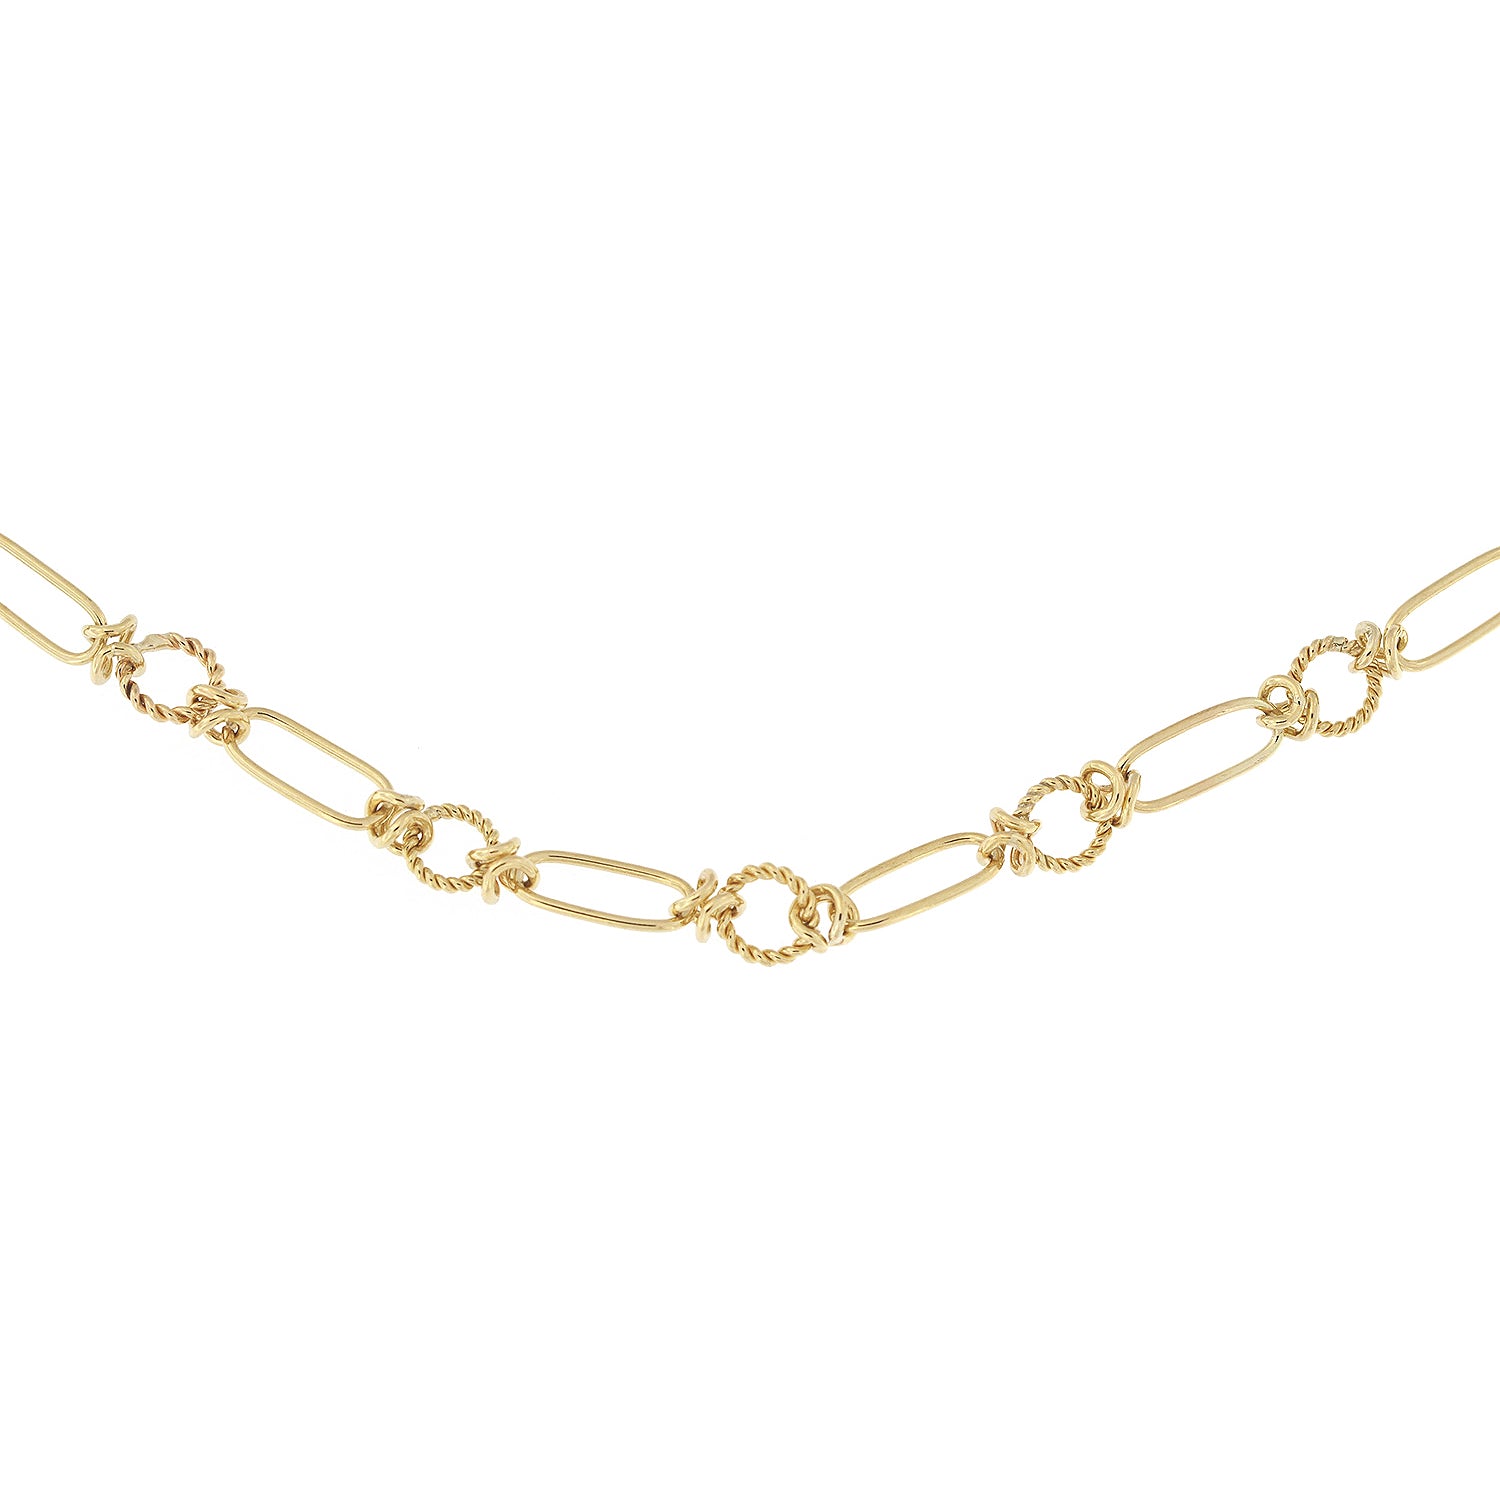 9ct Yellow Gold Necklace with Three 7mm Ivory Pearls and Gold Beads